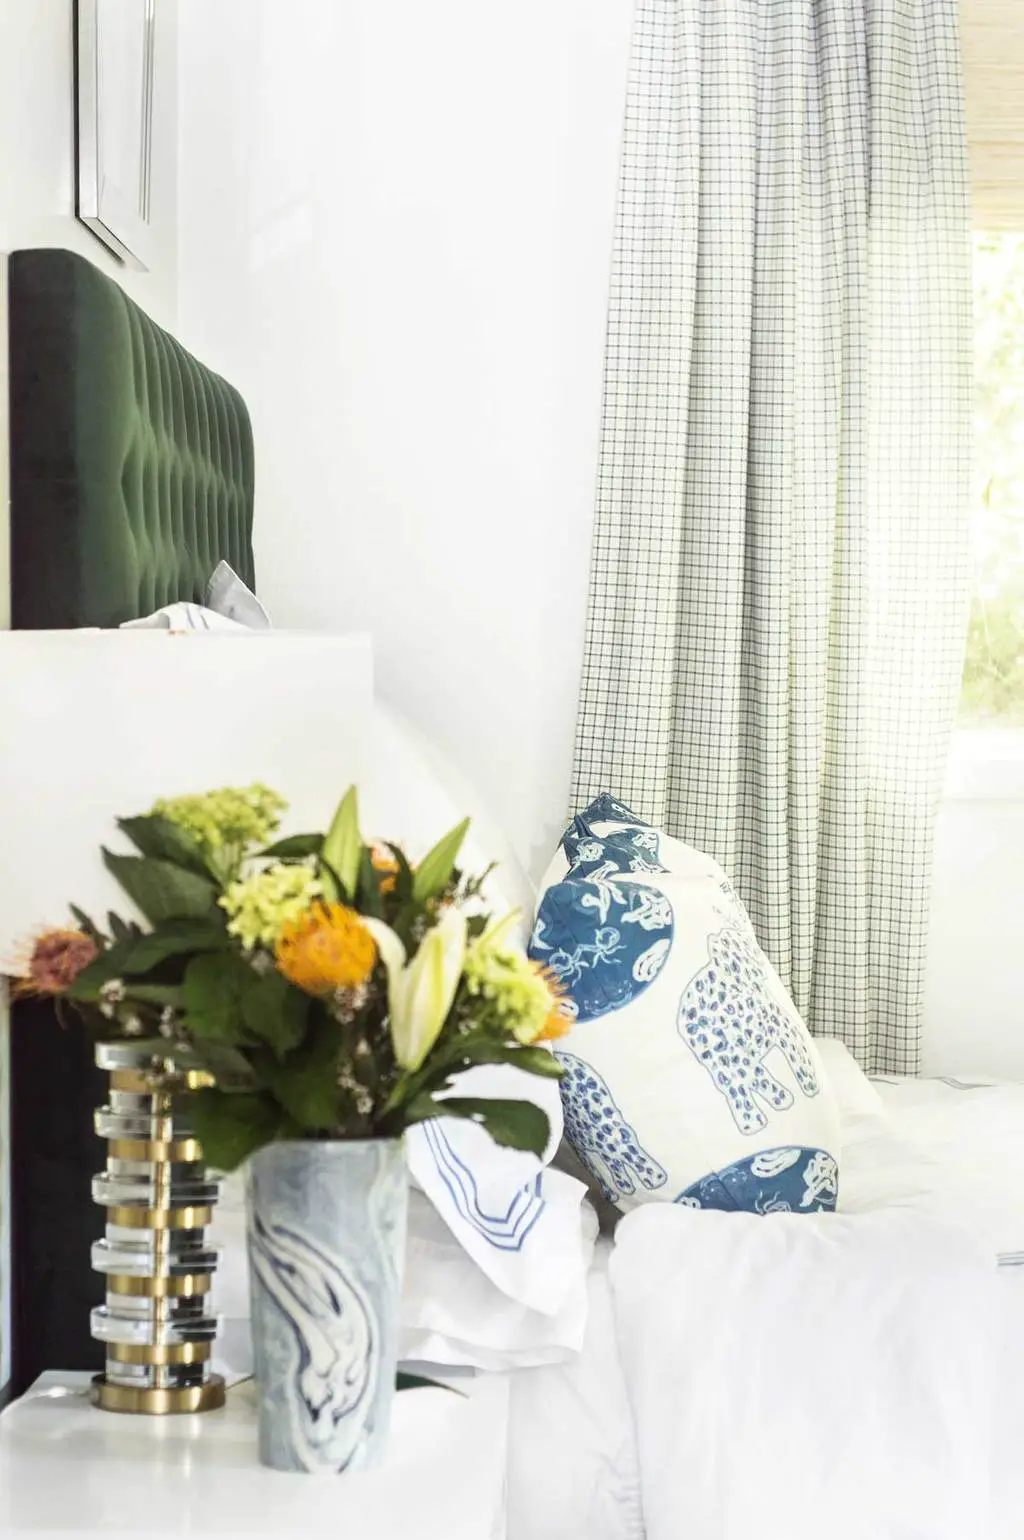 Blue and green bedroom makeover with tufted headboard on Thou Swell @thouswellblog